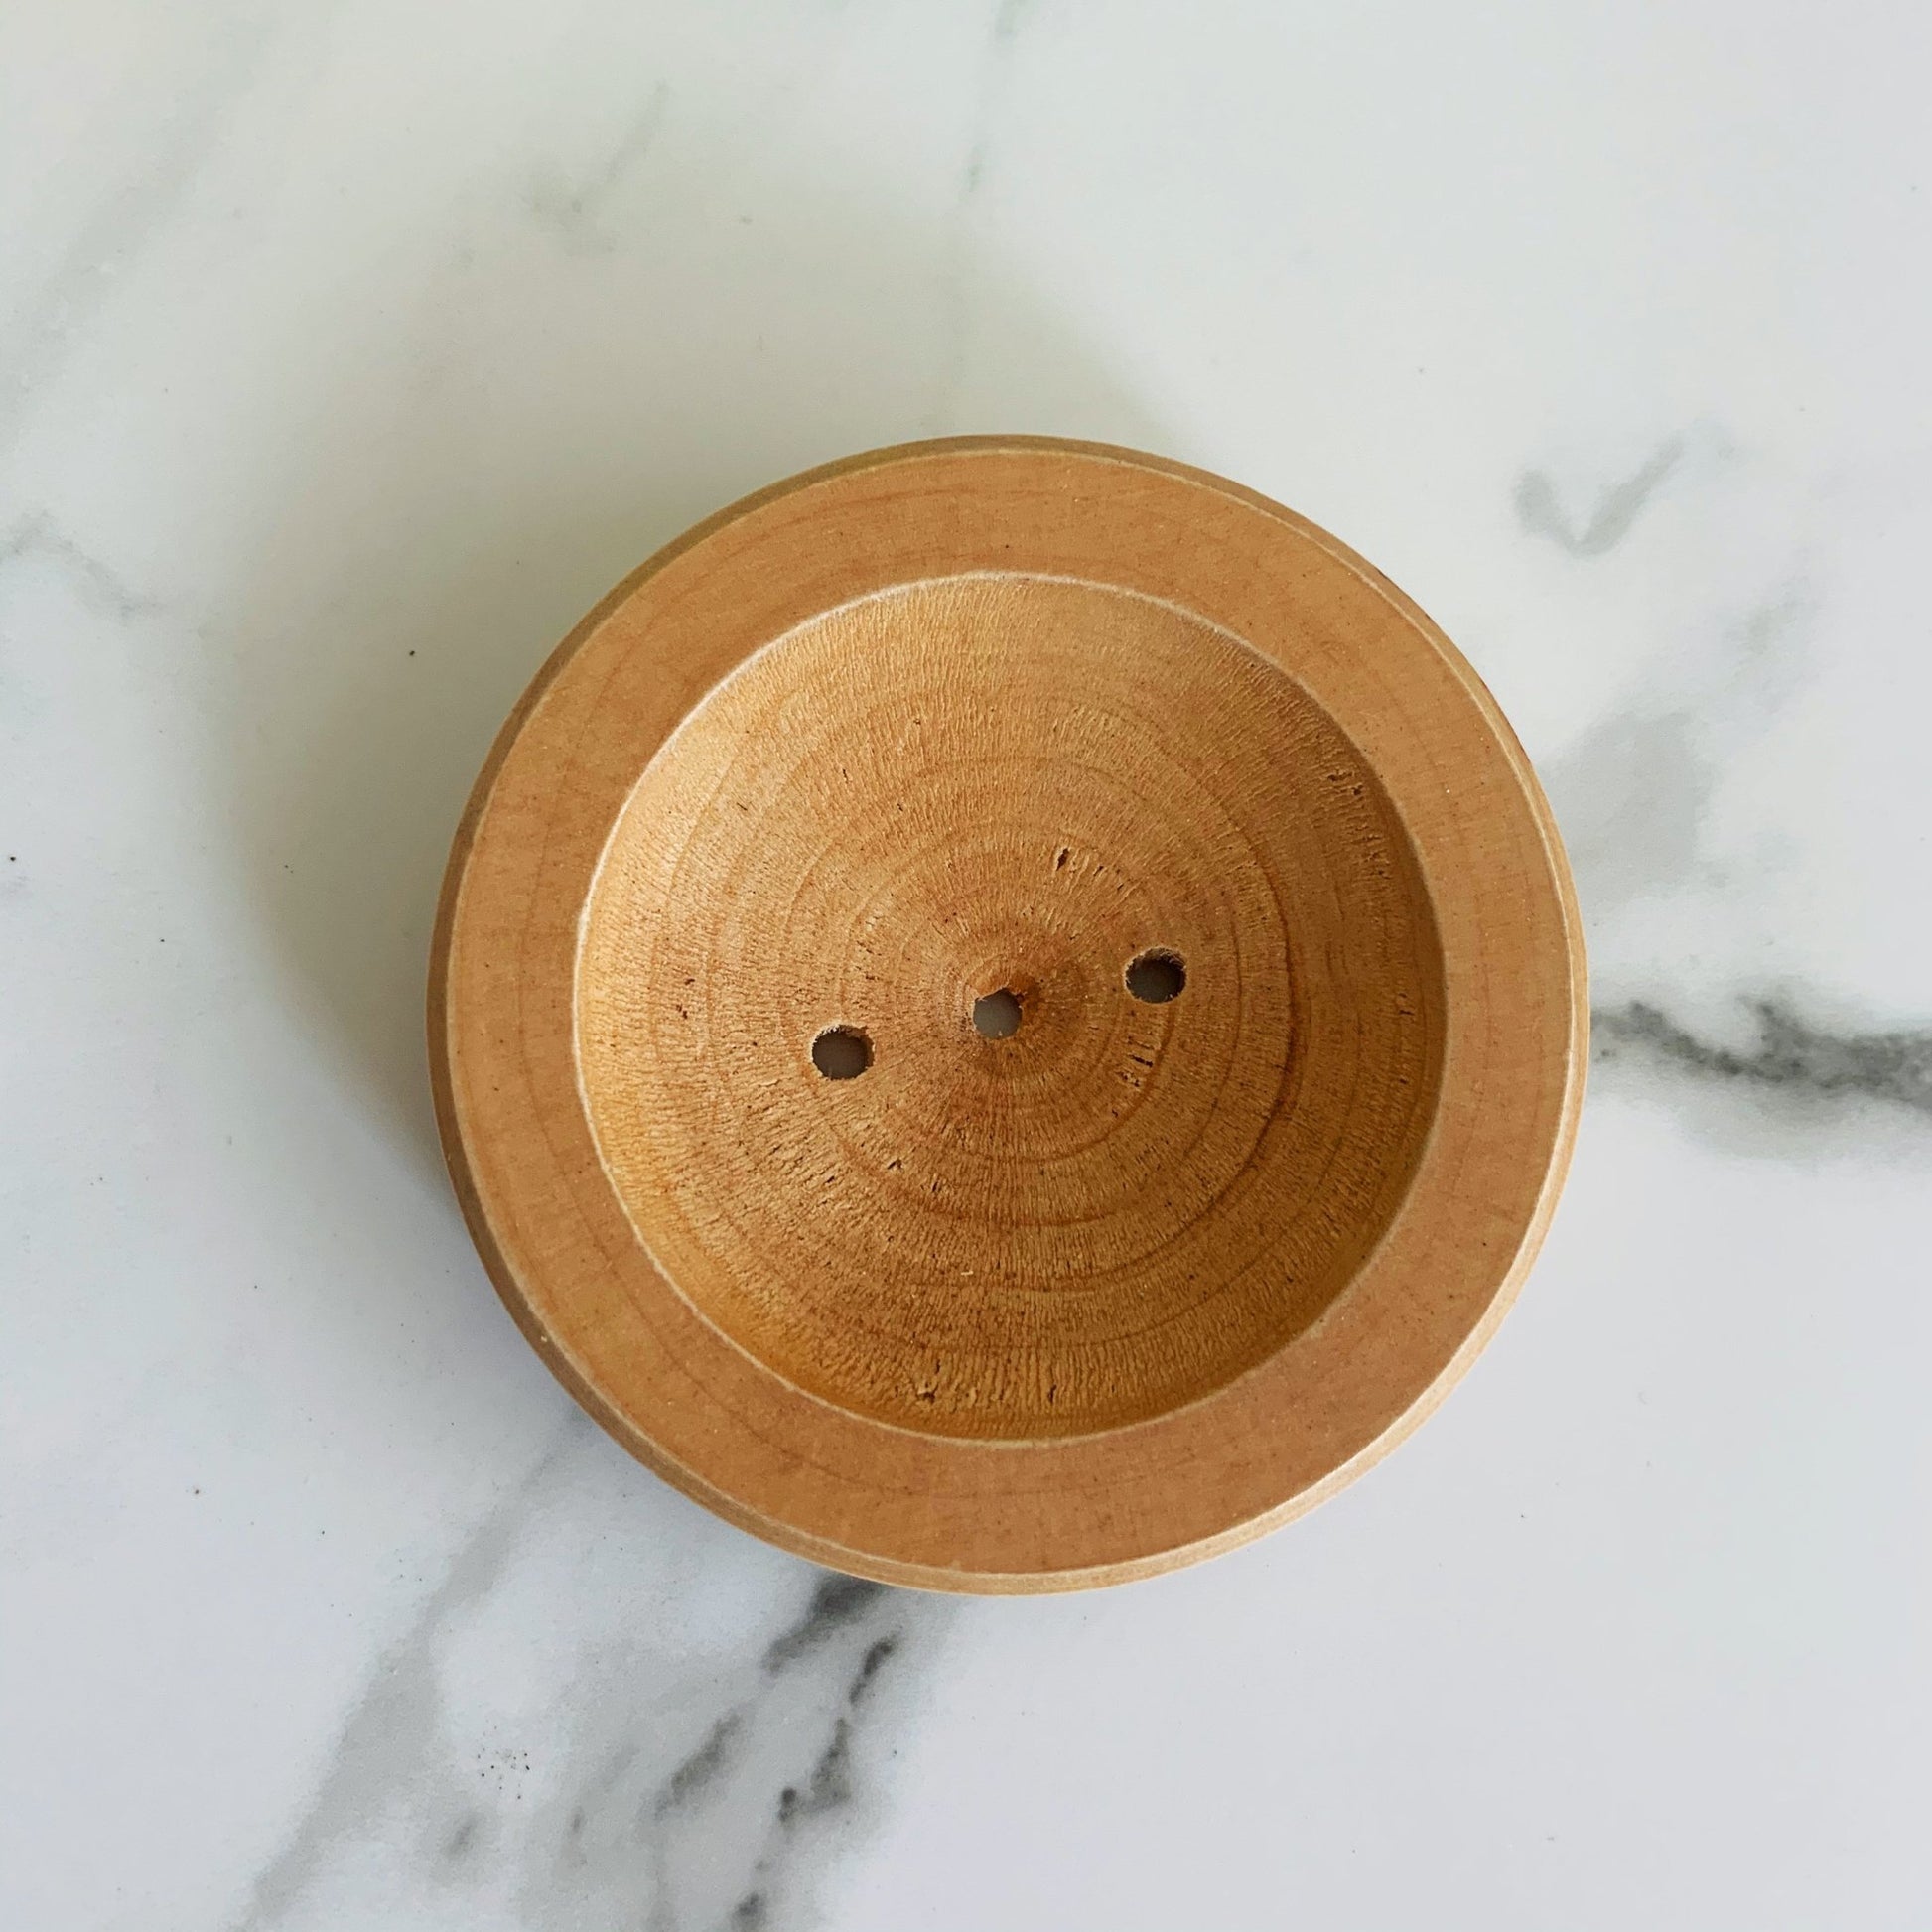 Wooden Soap Dish - Whipped Up Wonderful